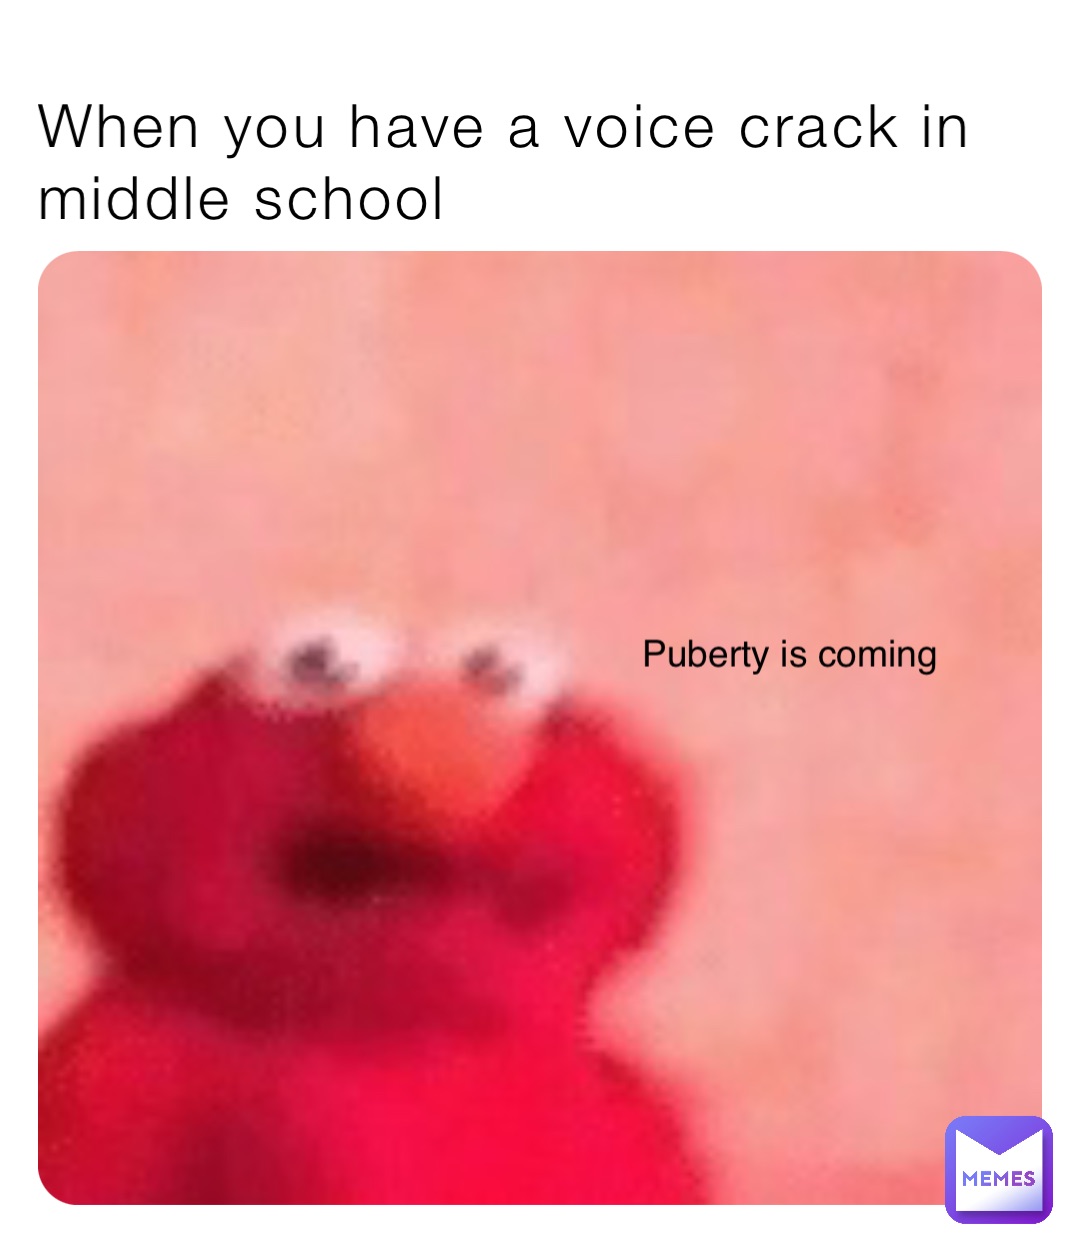 When you have a voice crack in middle school Puberty is coming